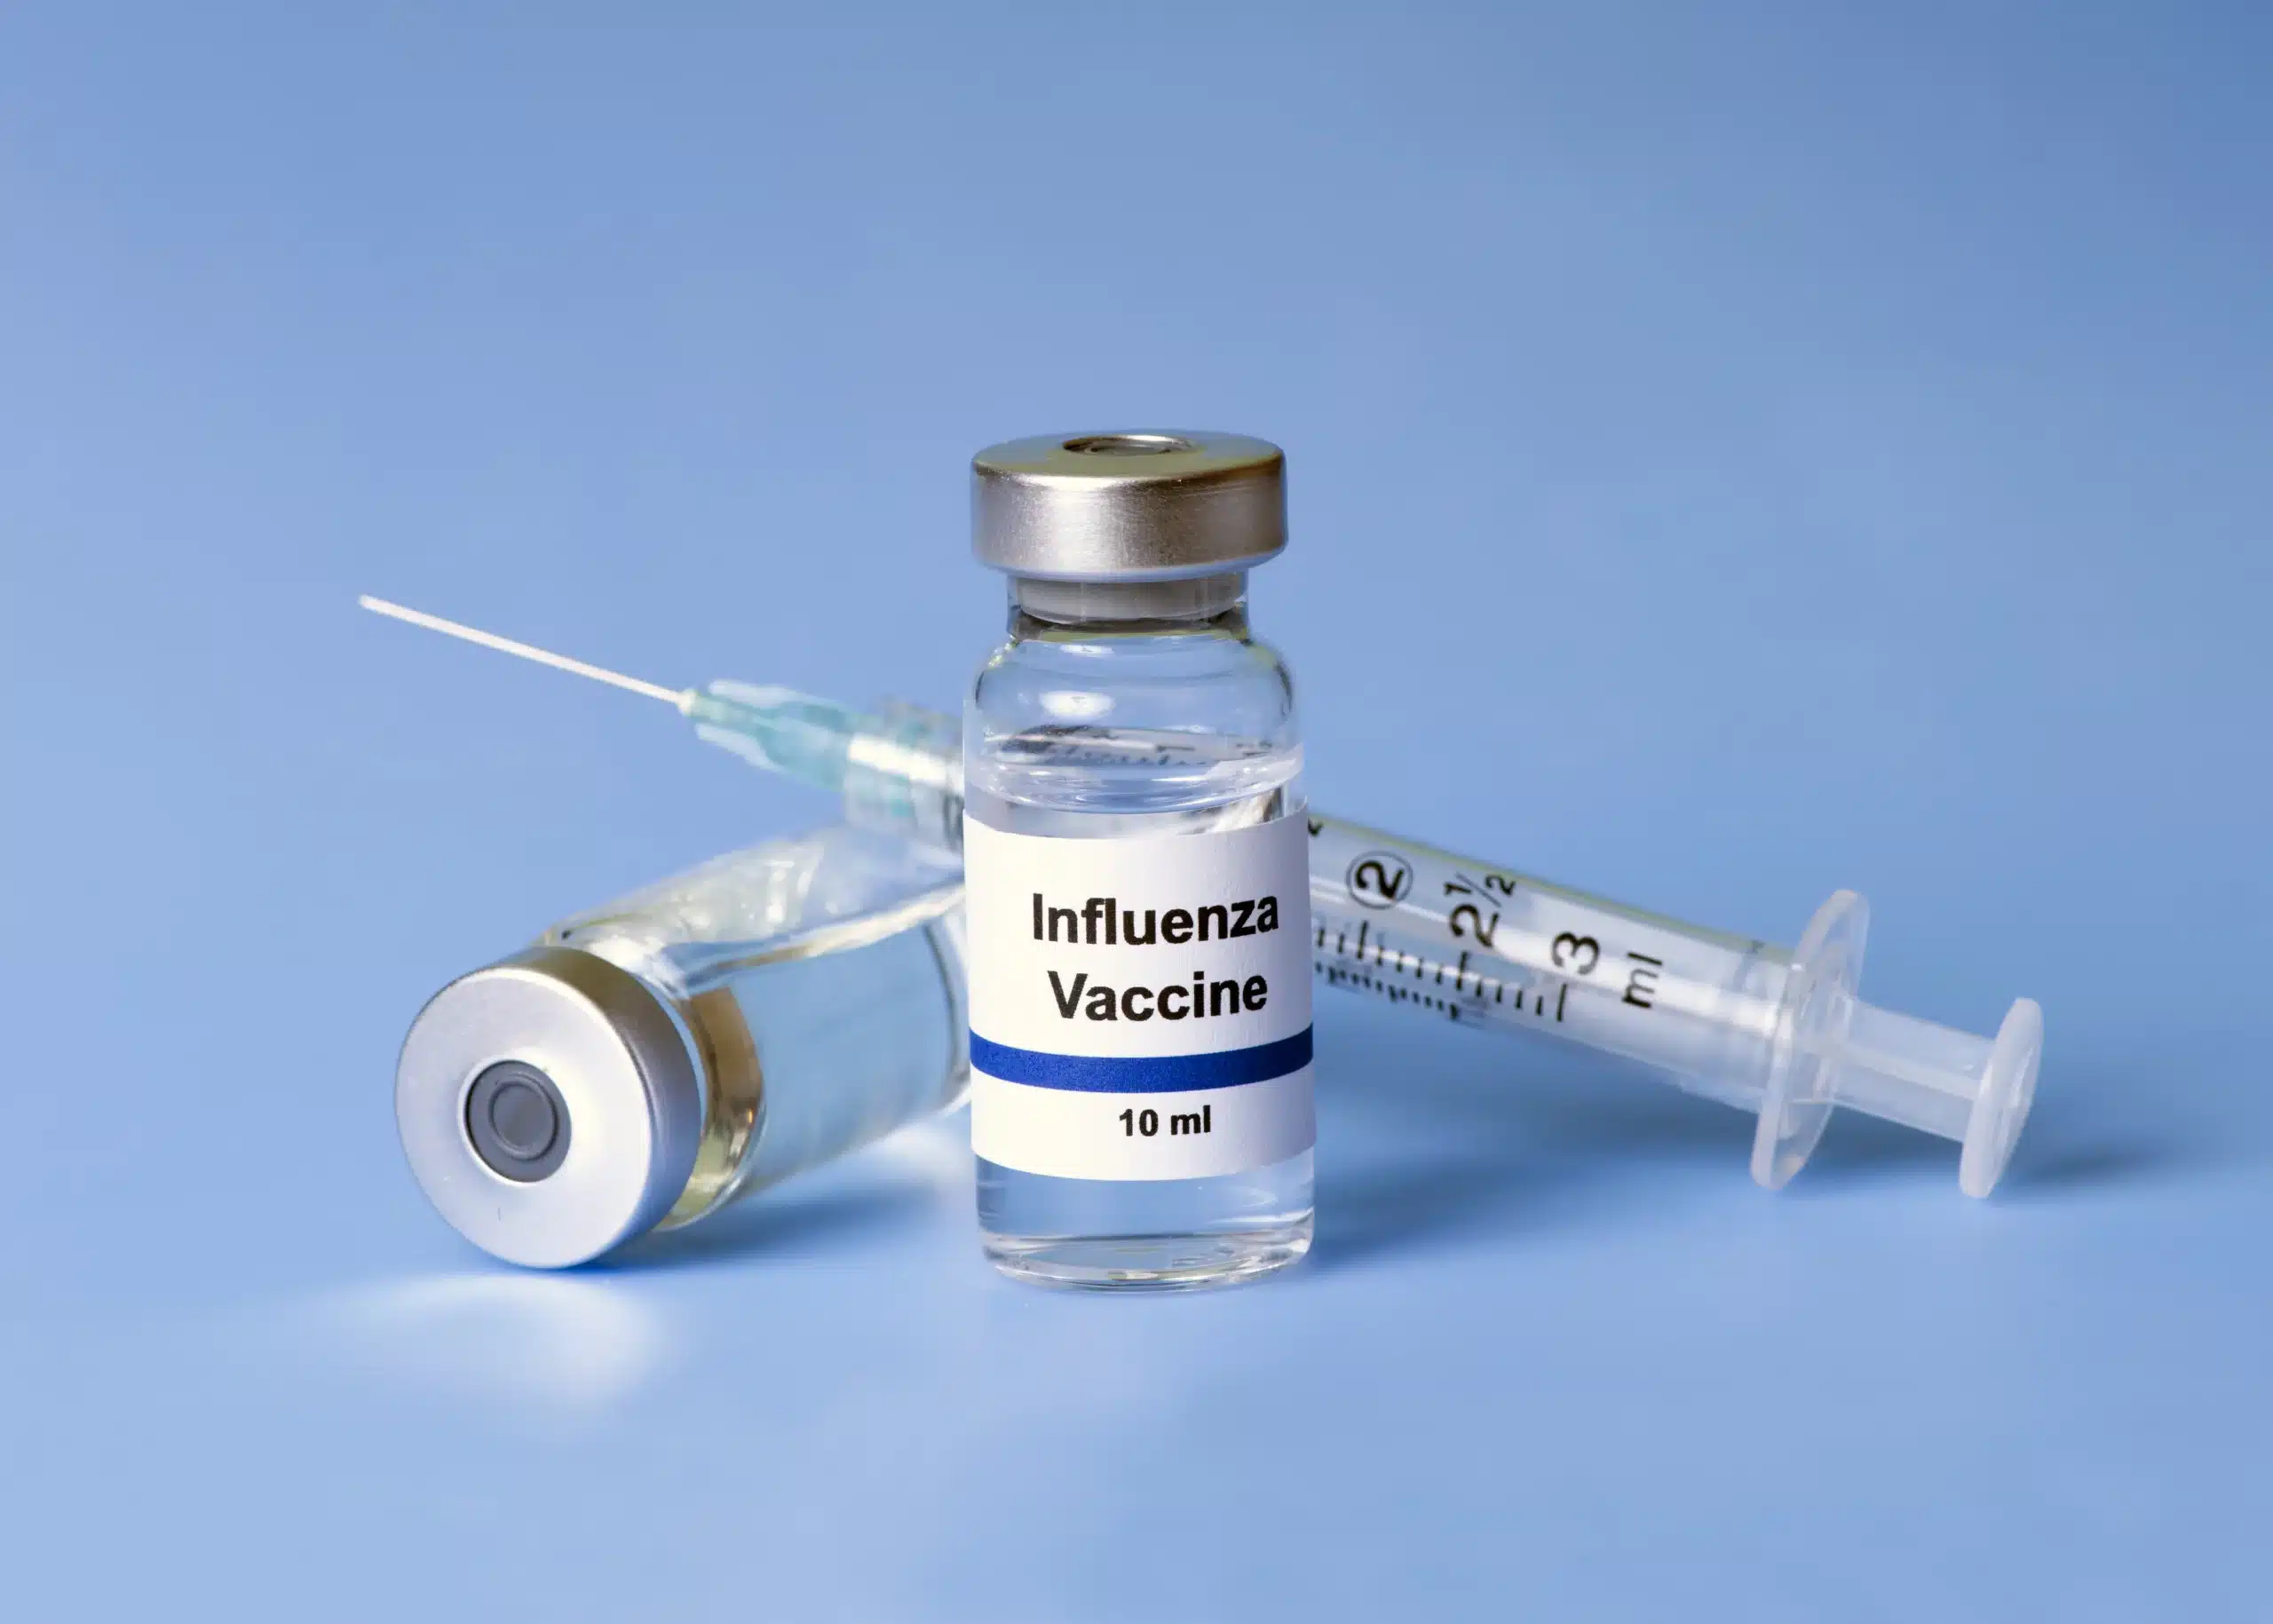 Fall’s Here: Get Your Flu Shot Today